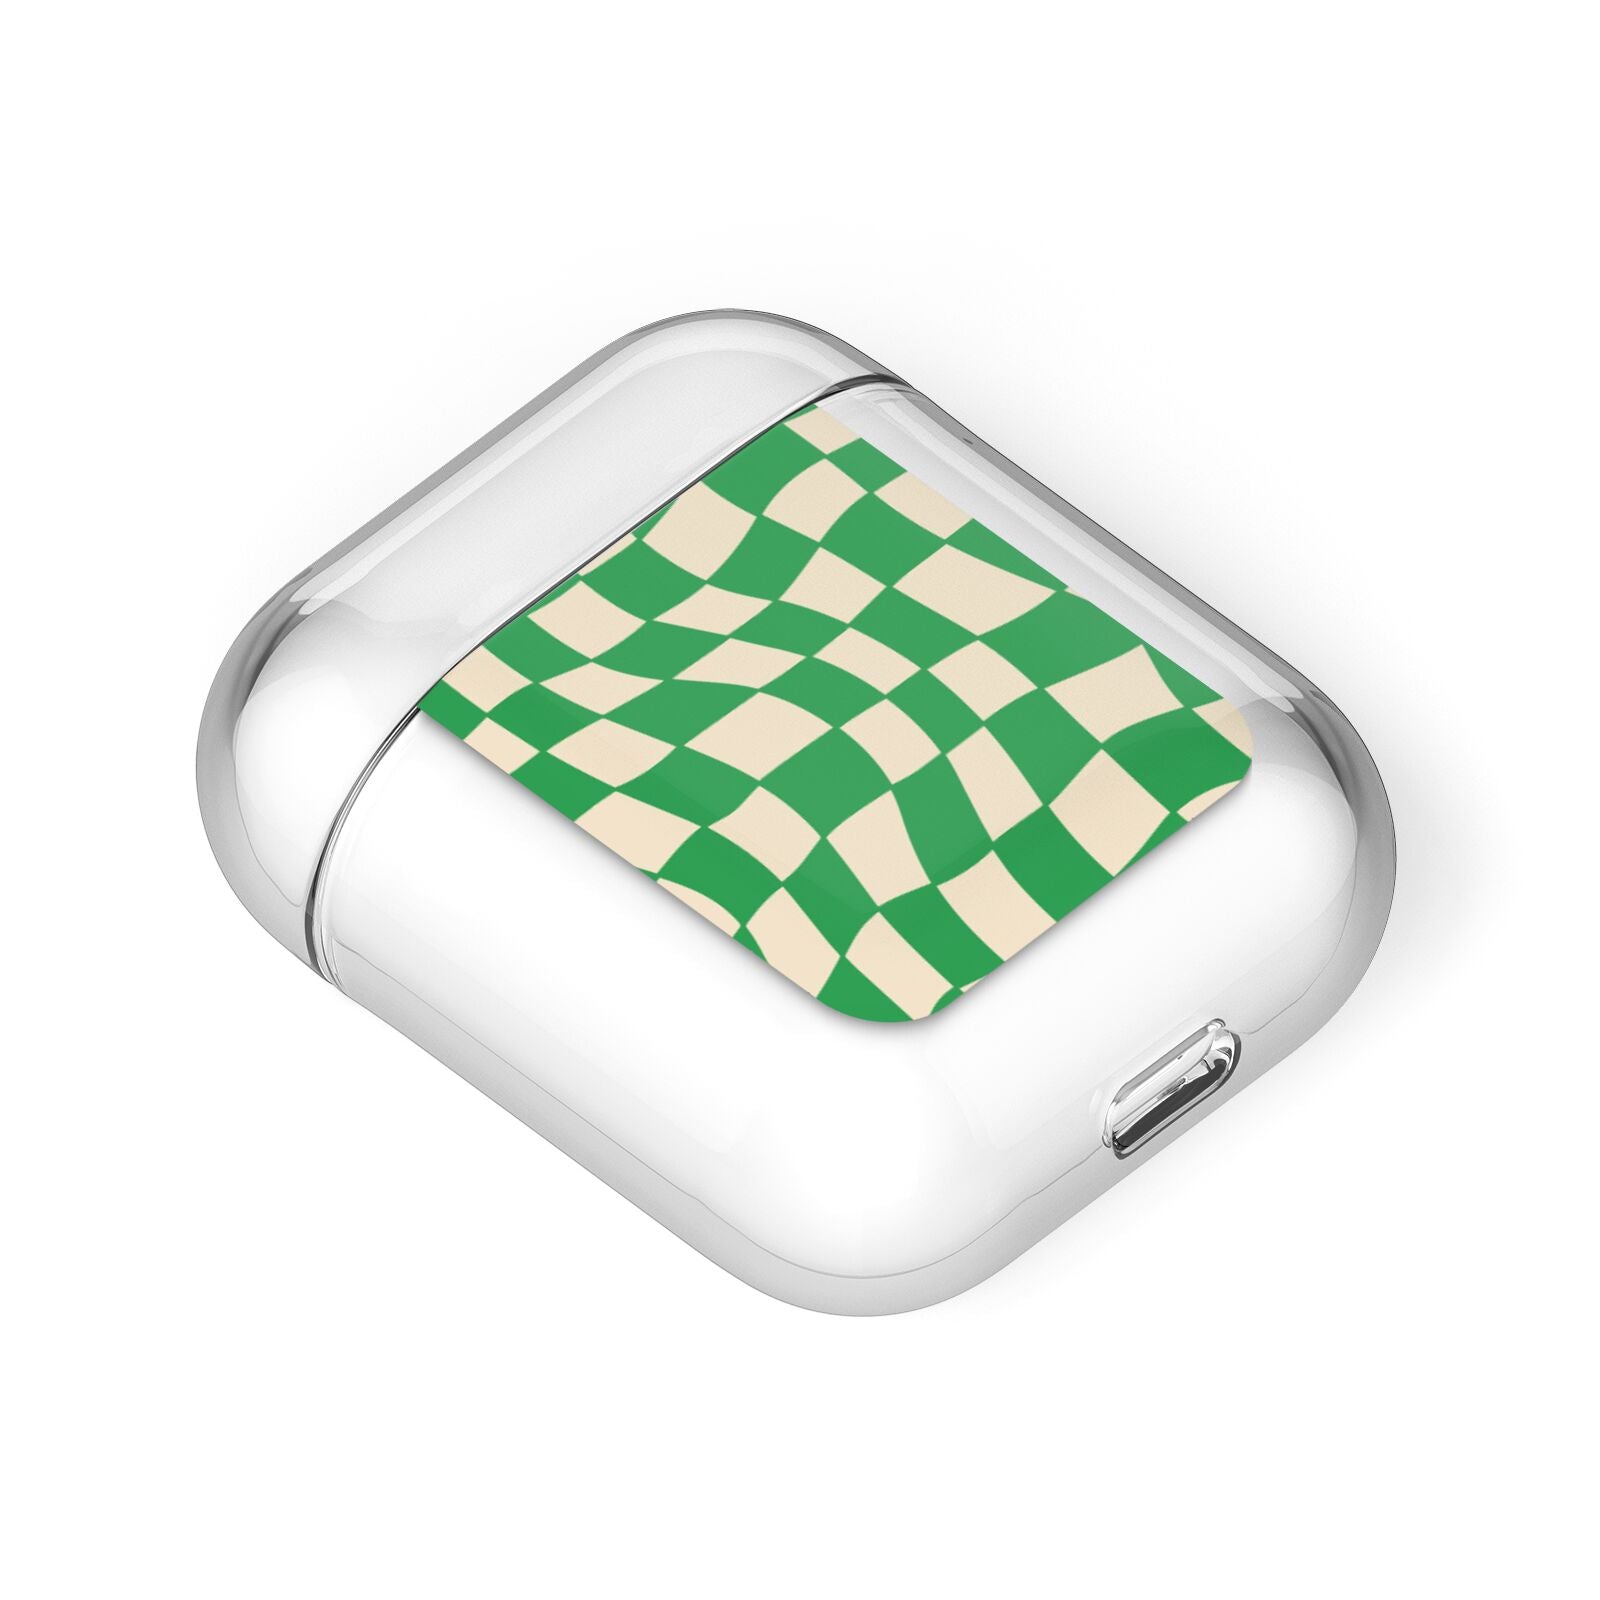 Green Check AirPods Case Laid Flat